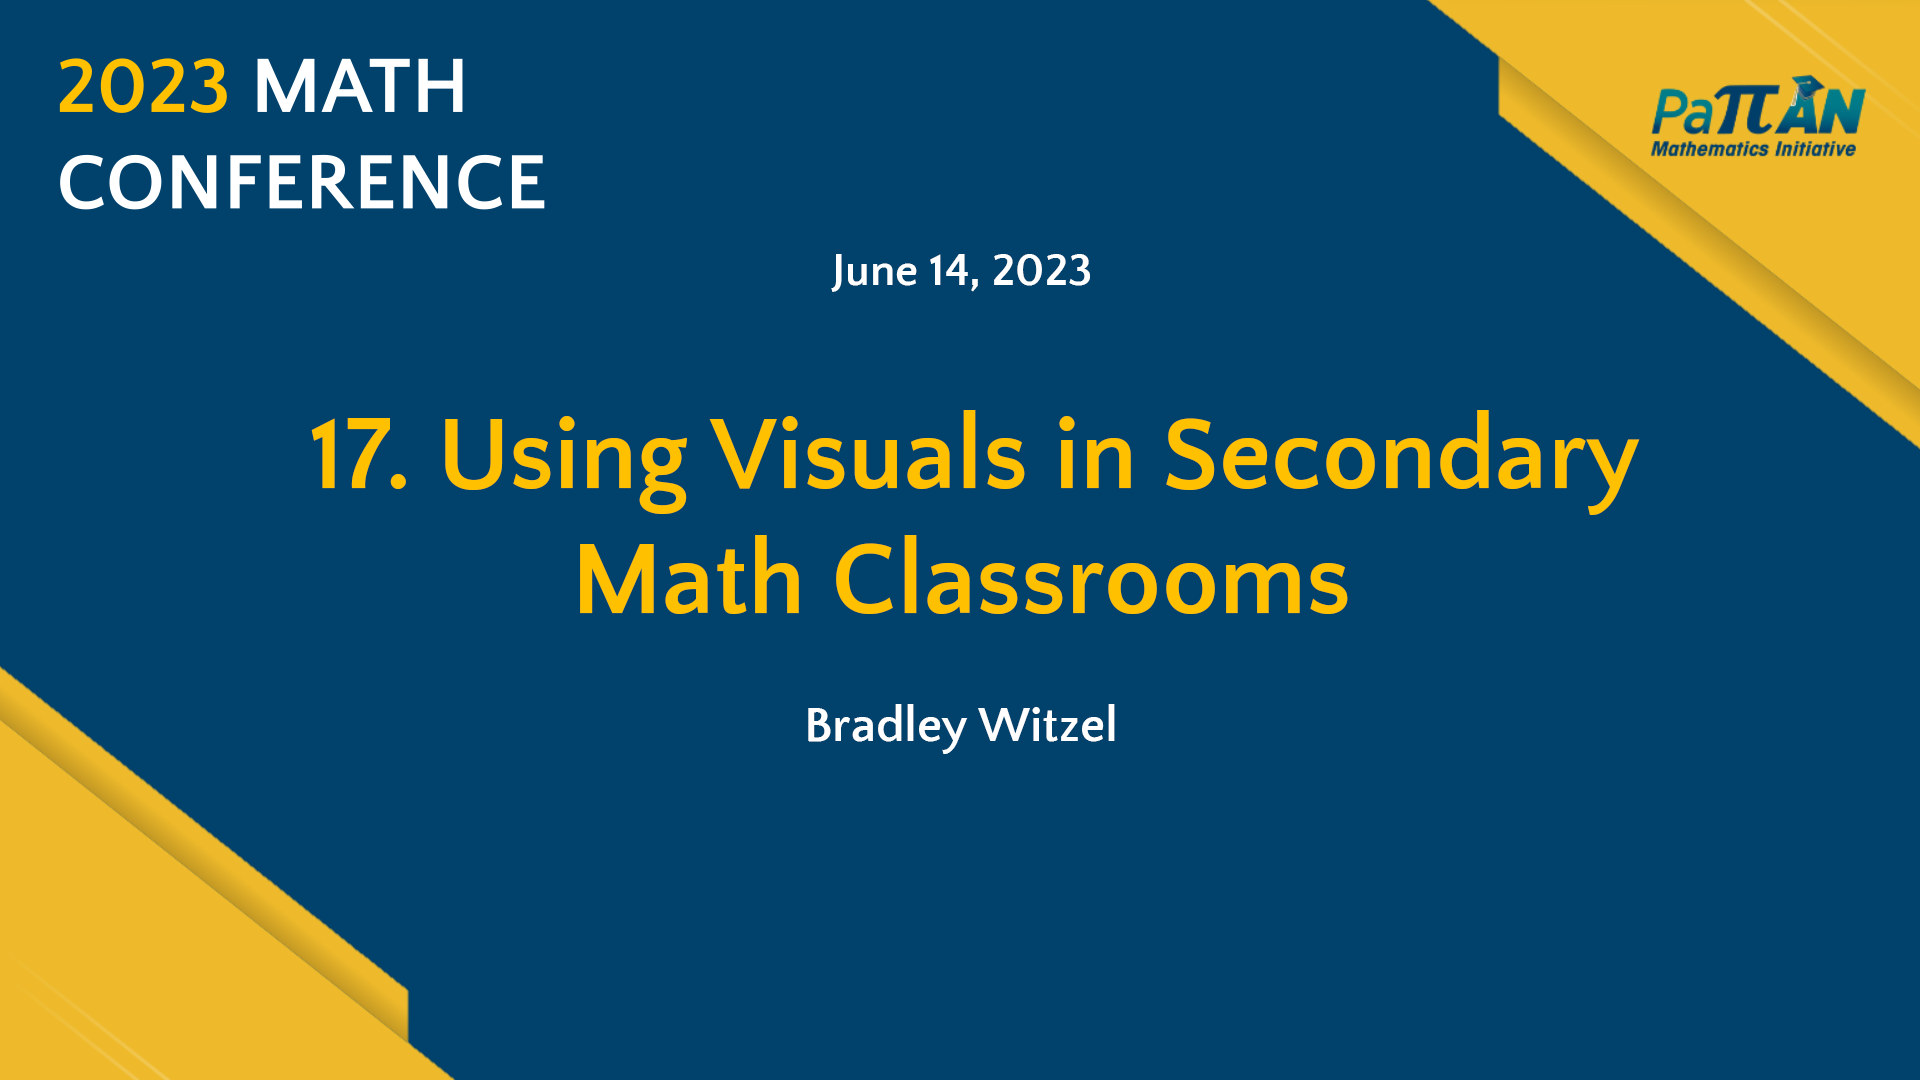 17. Using Visuals in Secondary Math Classrooms | Math Conference 2023